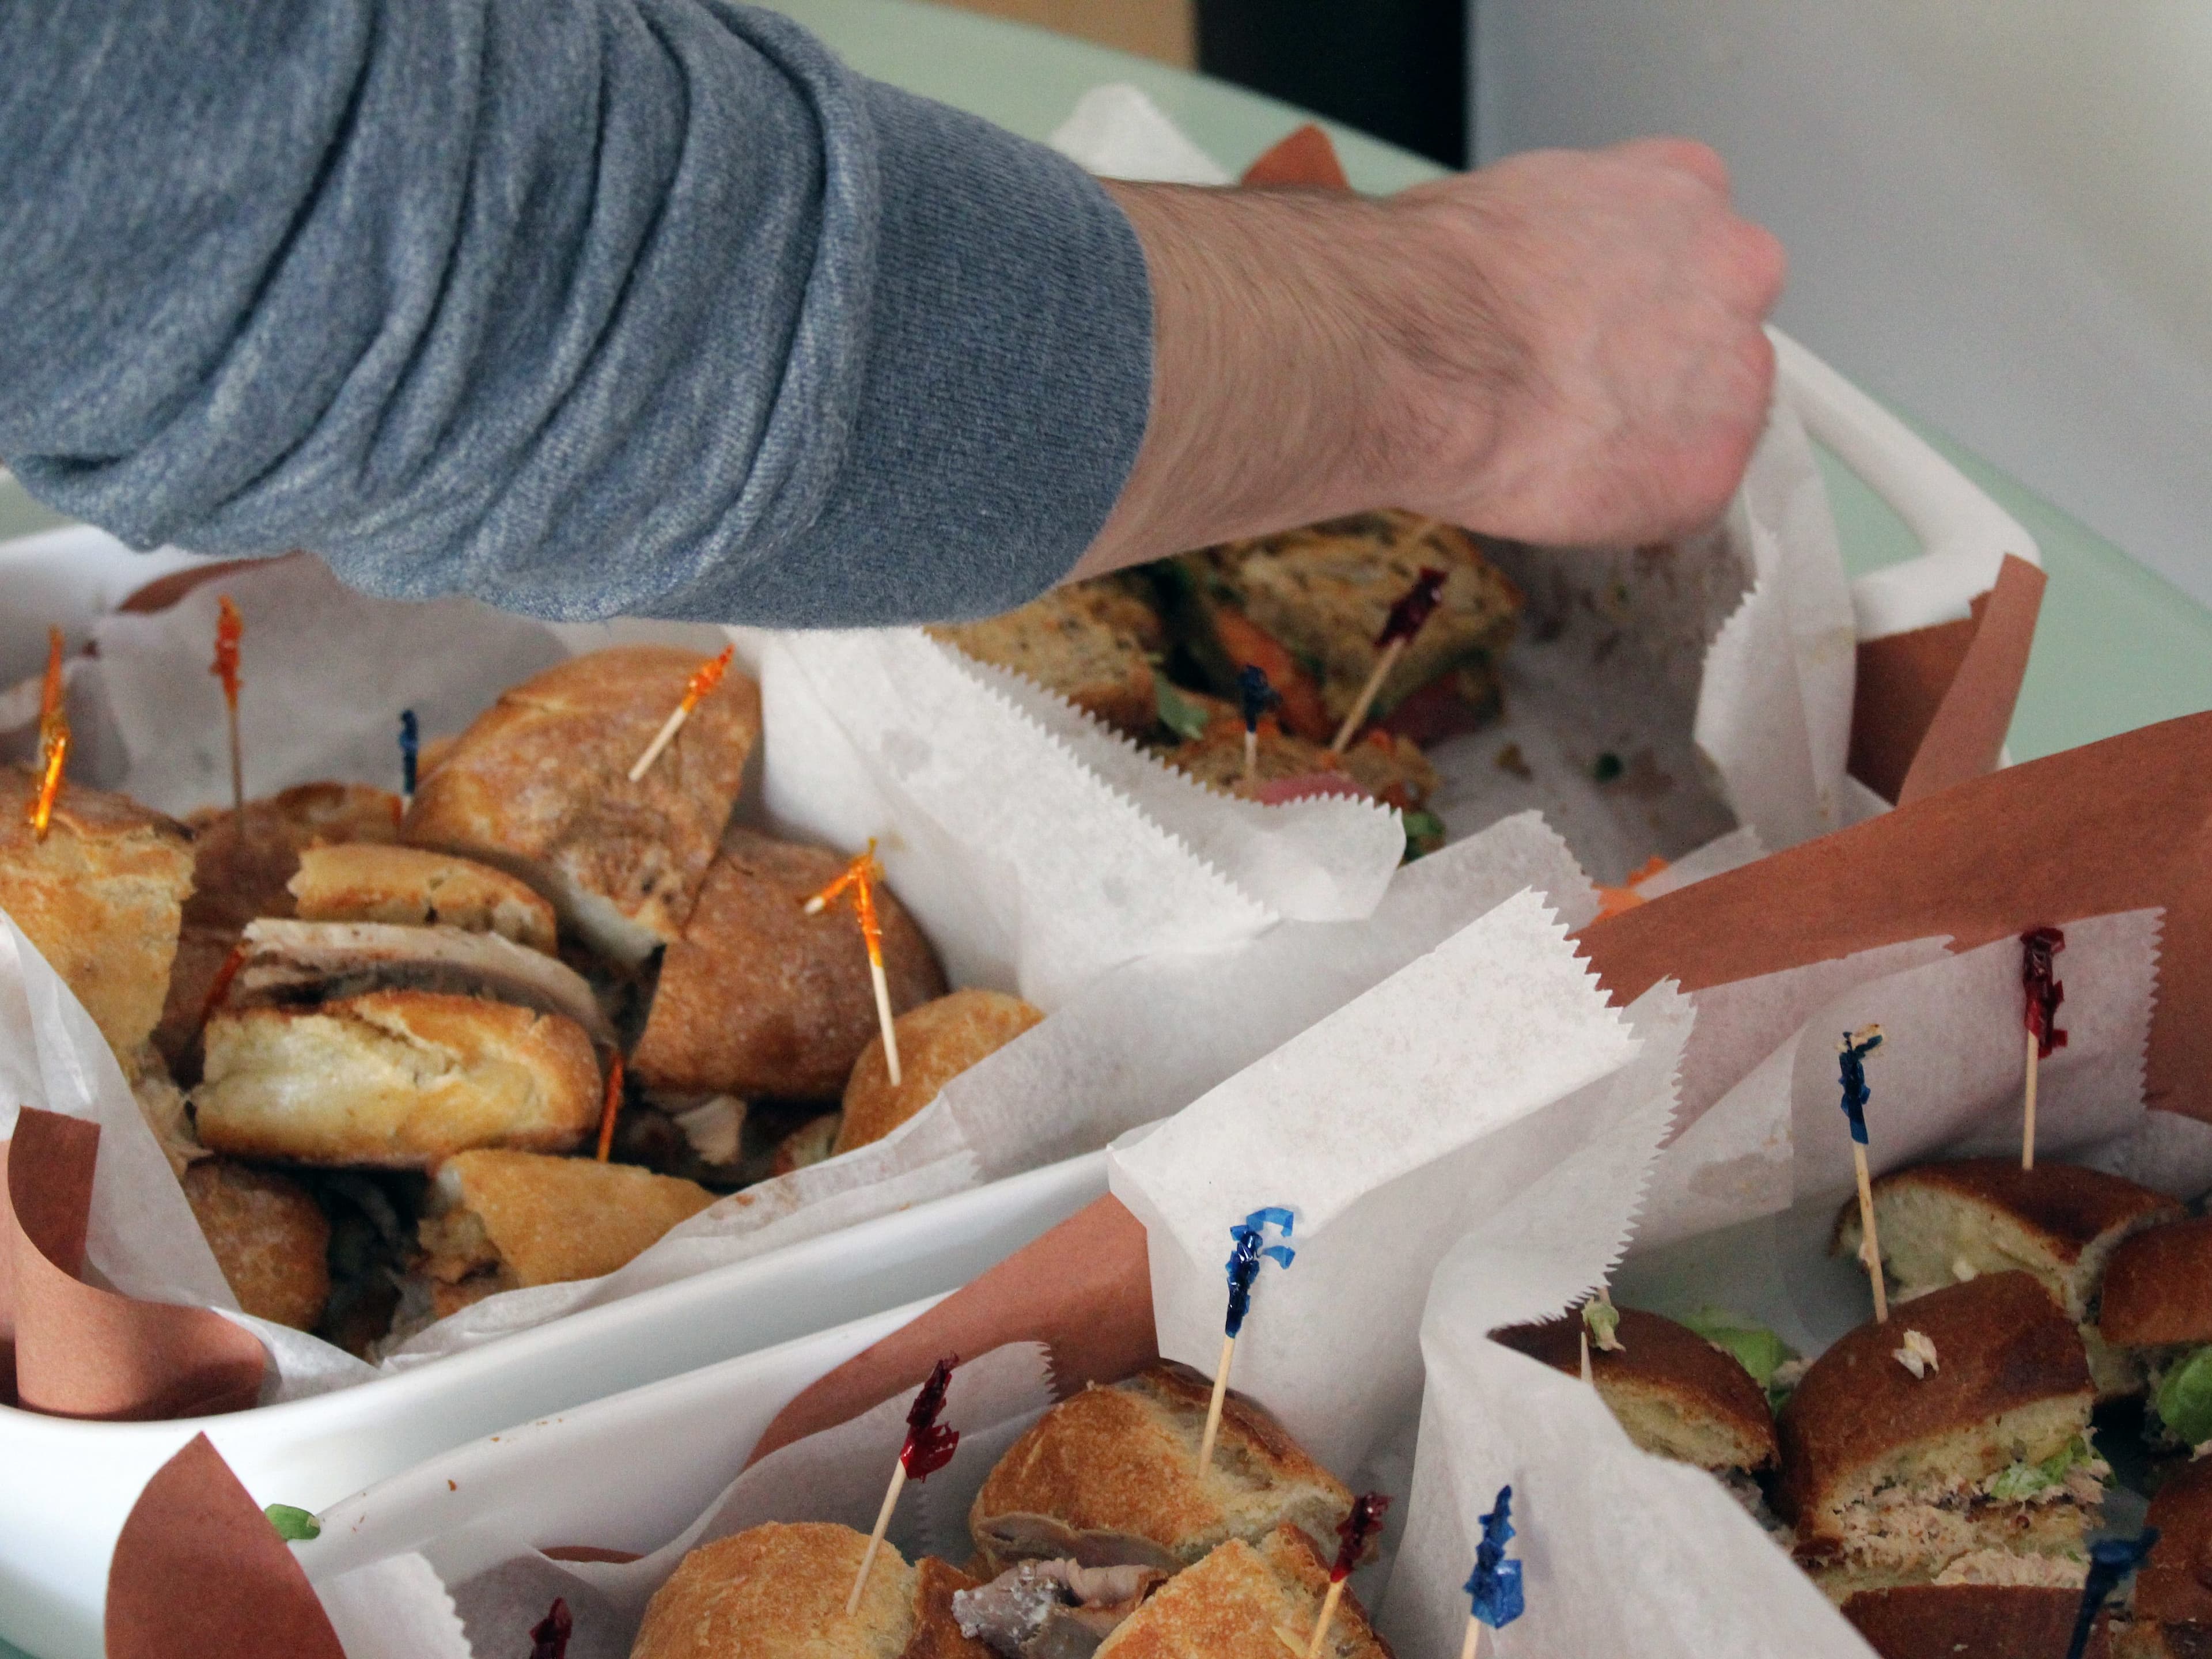 A person reaches for a sandwich from a platter filled with various sandwich pieces. Each piece is secured with a colorful toothpick. The sandwiches are displayed on white trays lined with parchment paper. The person is wearing a gray long-sleeve shirt.